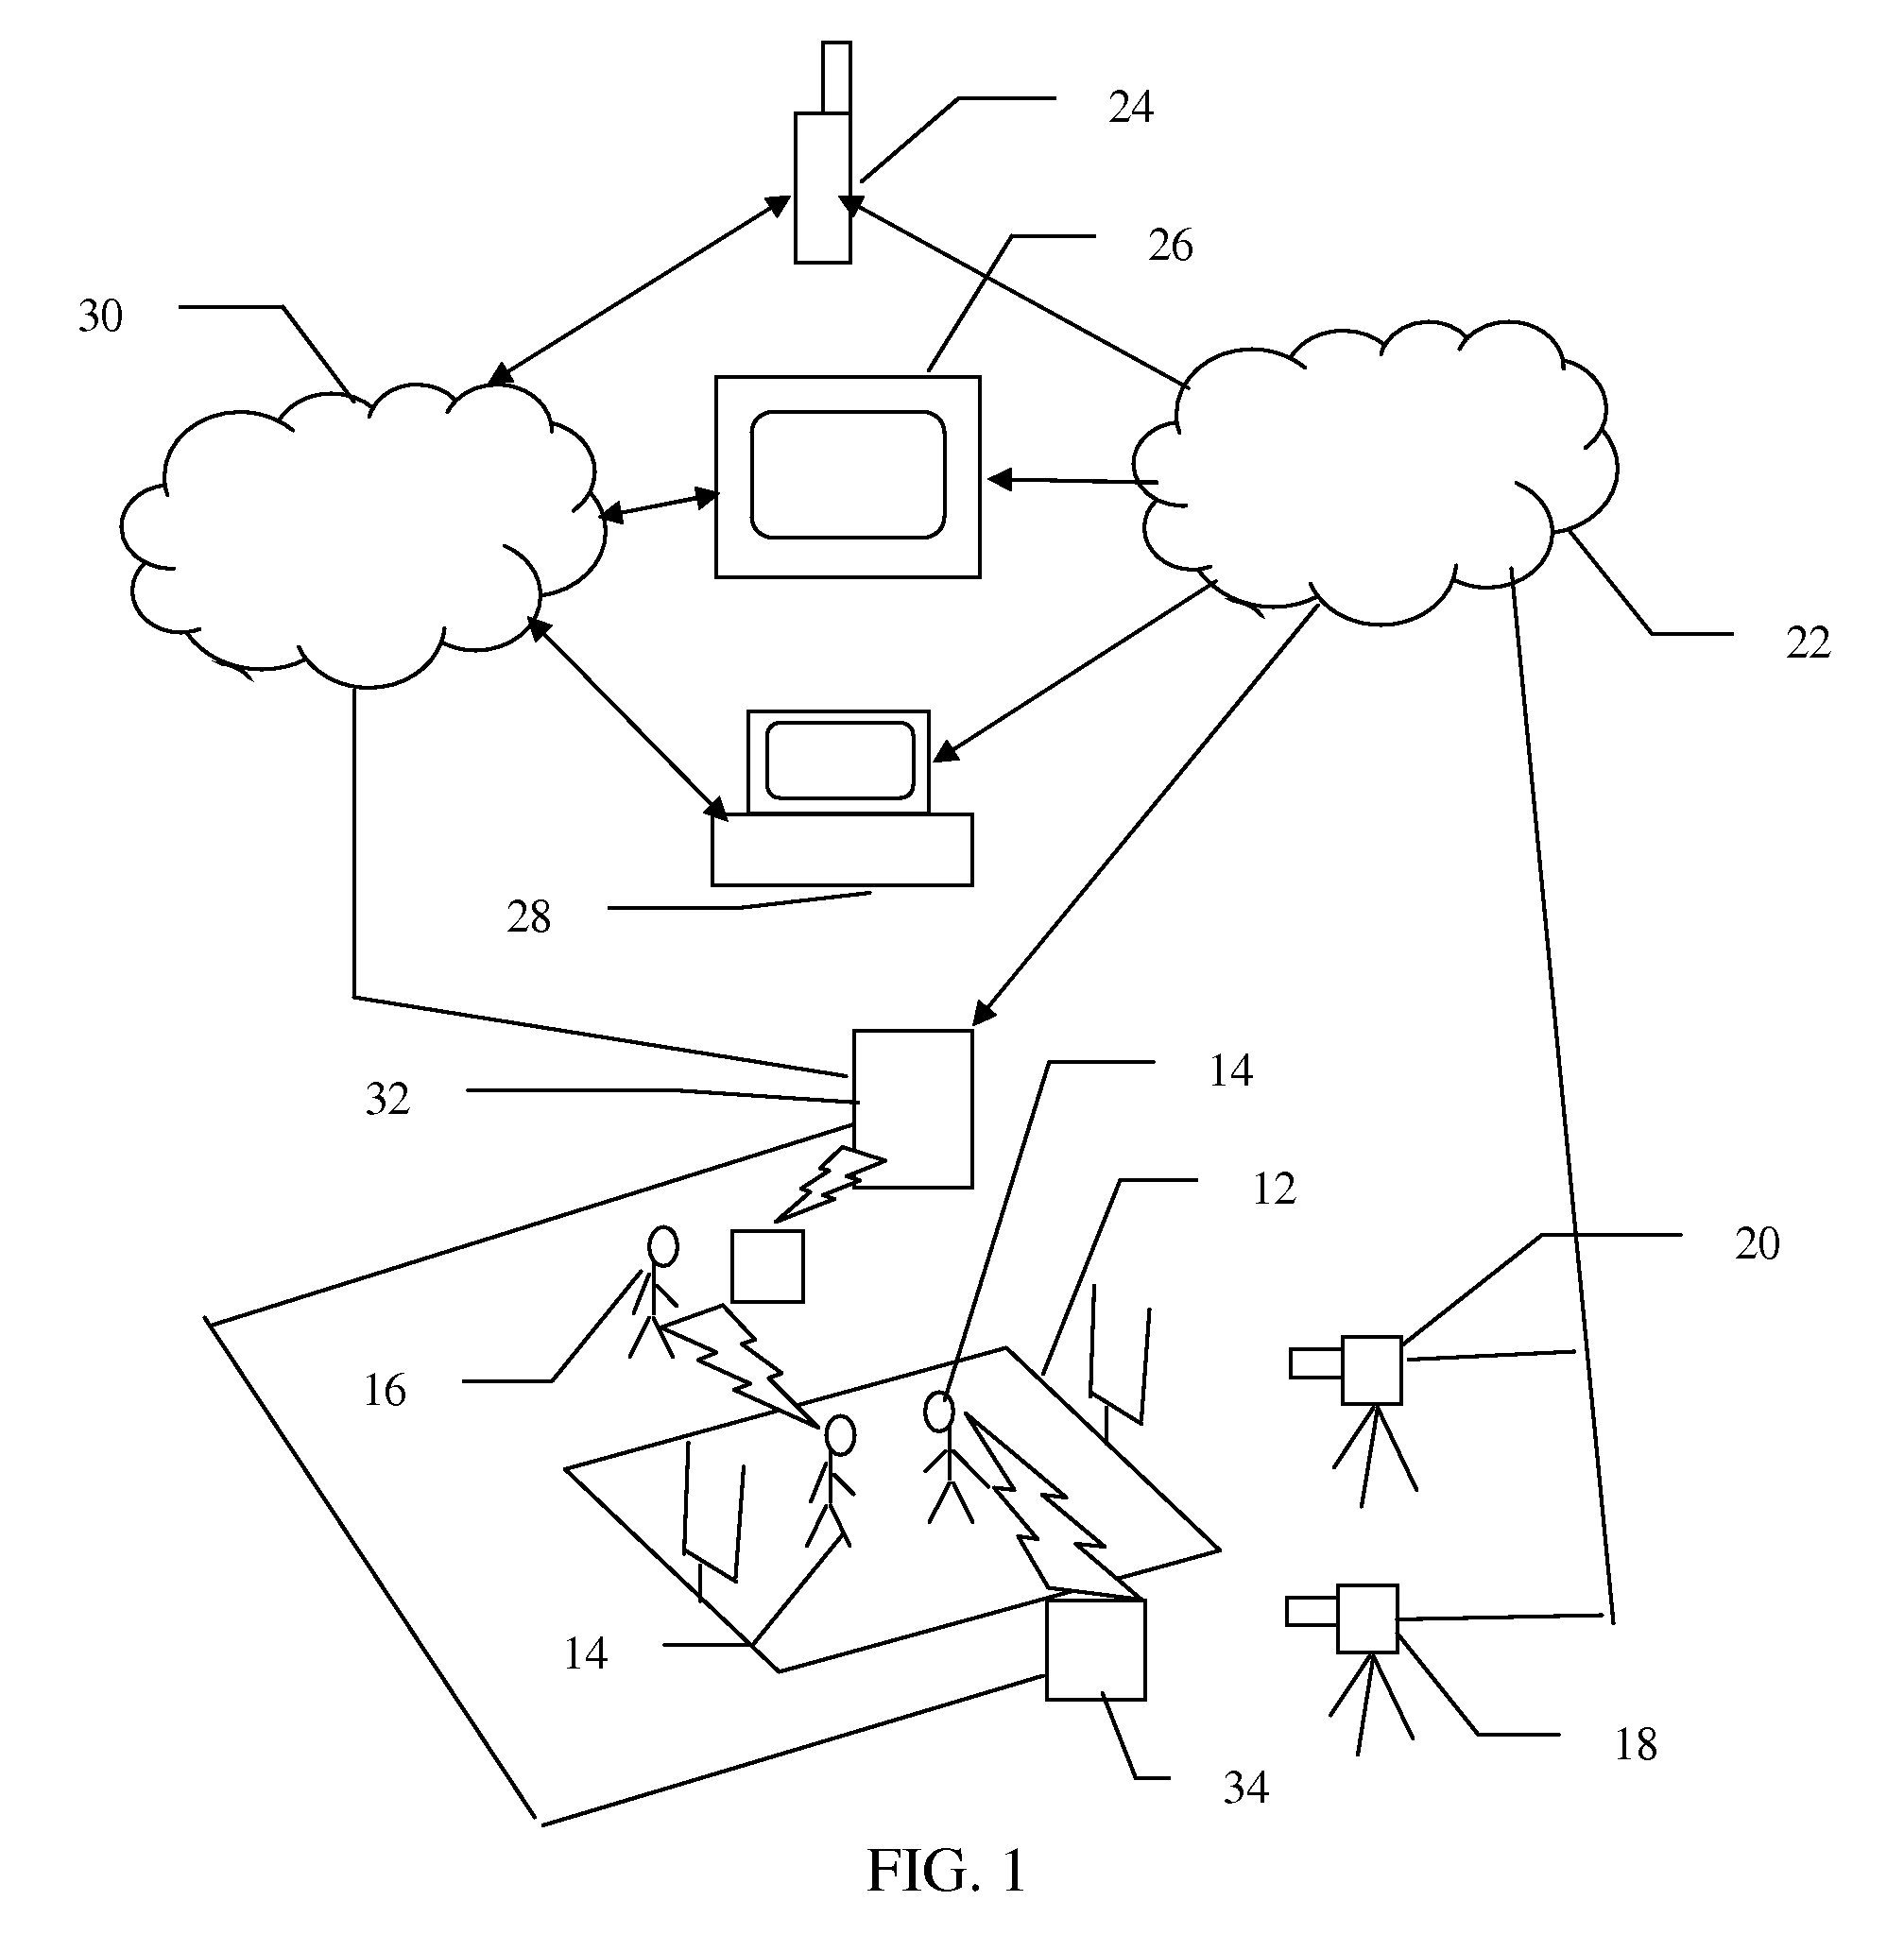 System and Method for Influencing an On-Going Event